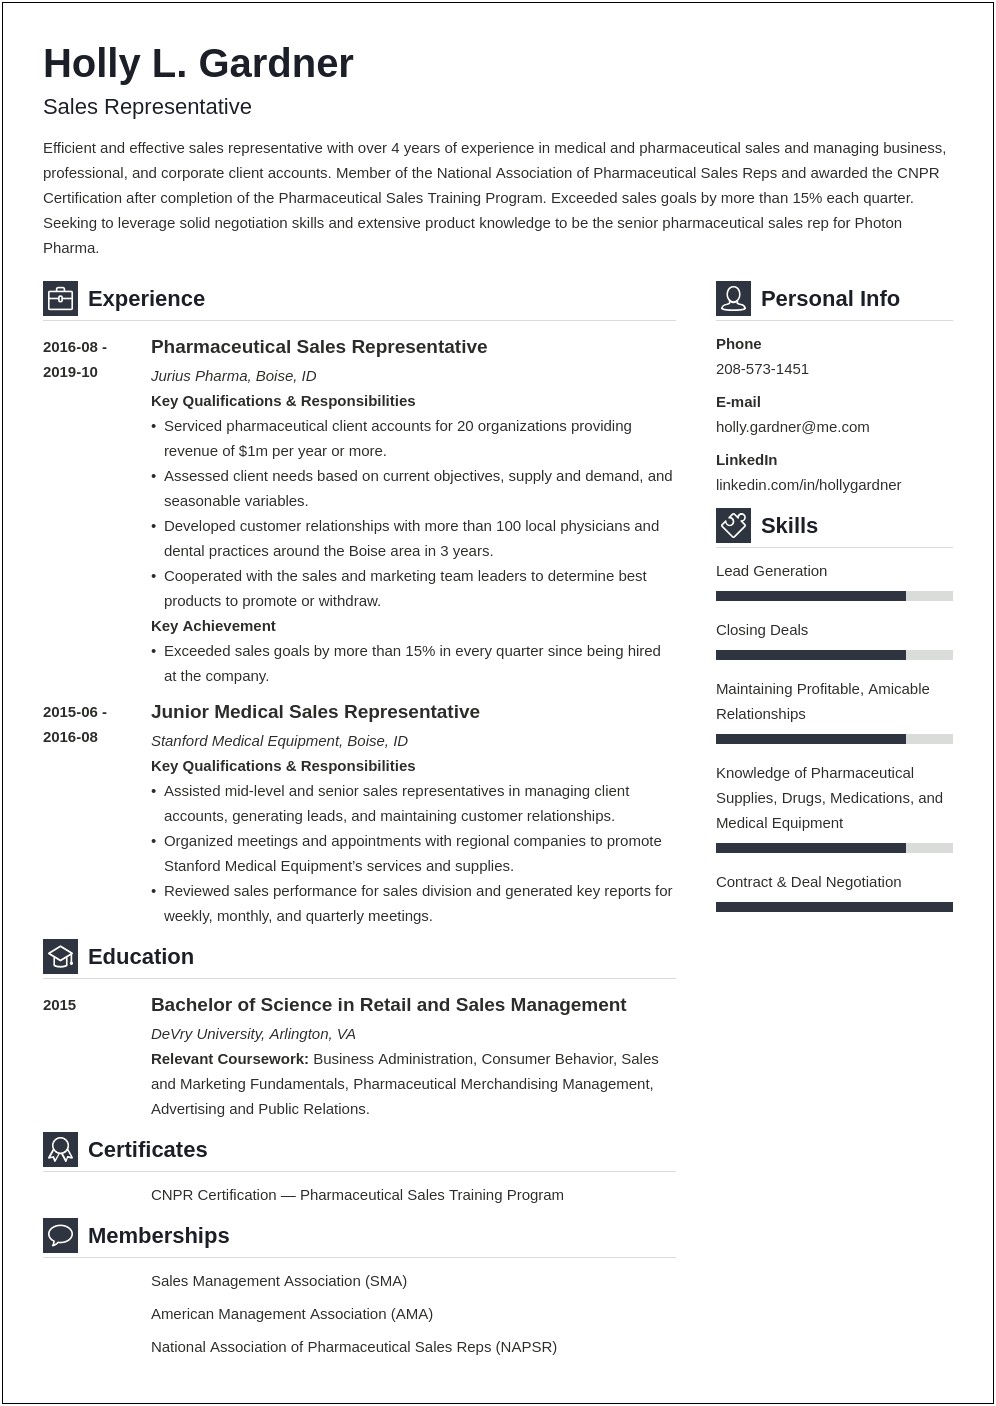 Sample Resume For Sales Representative With No Experience